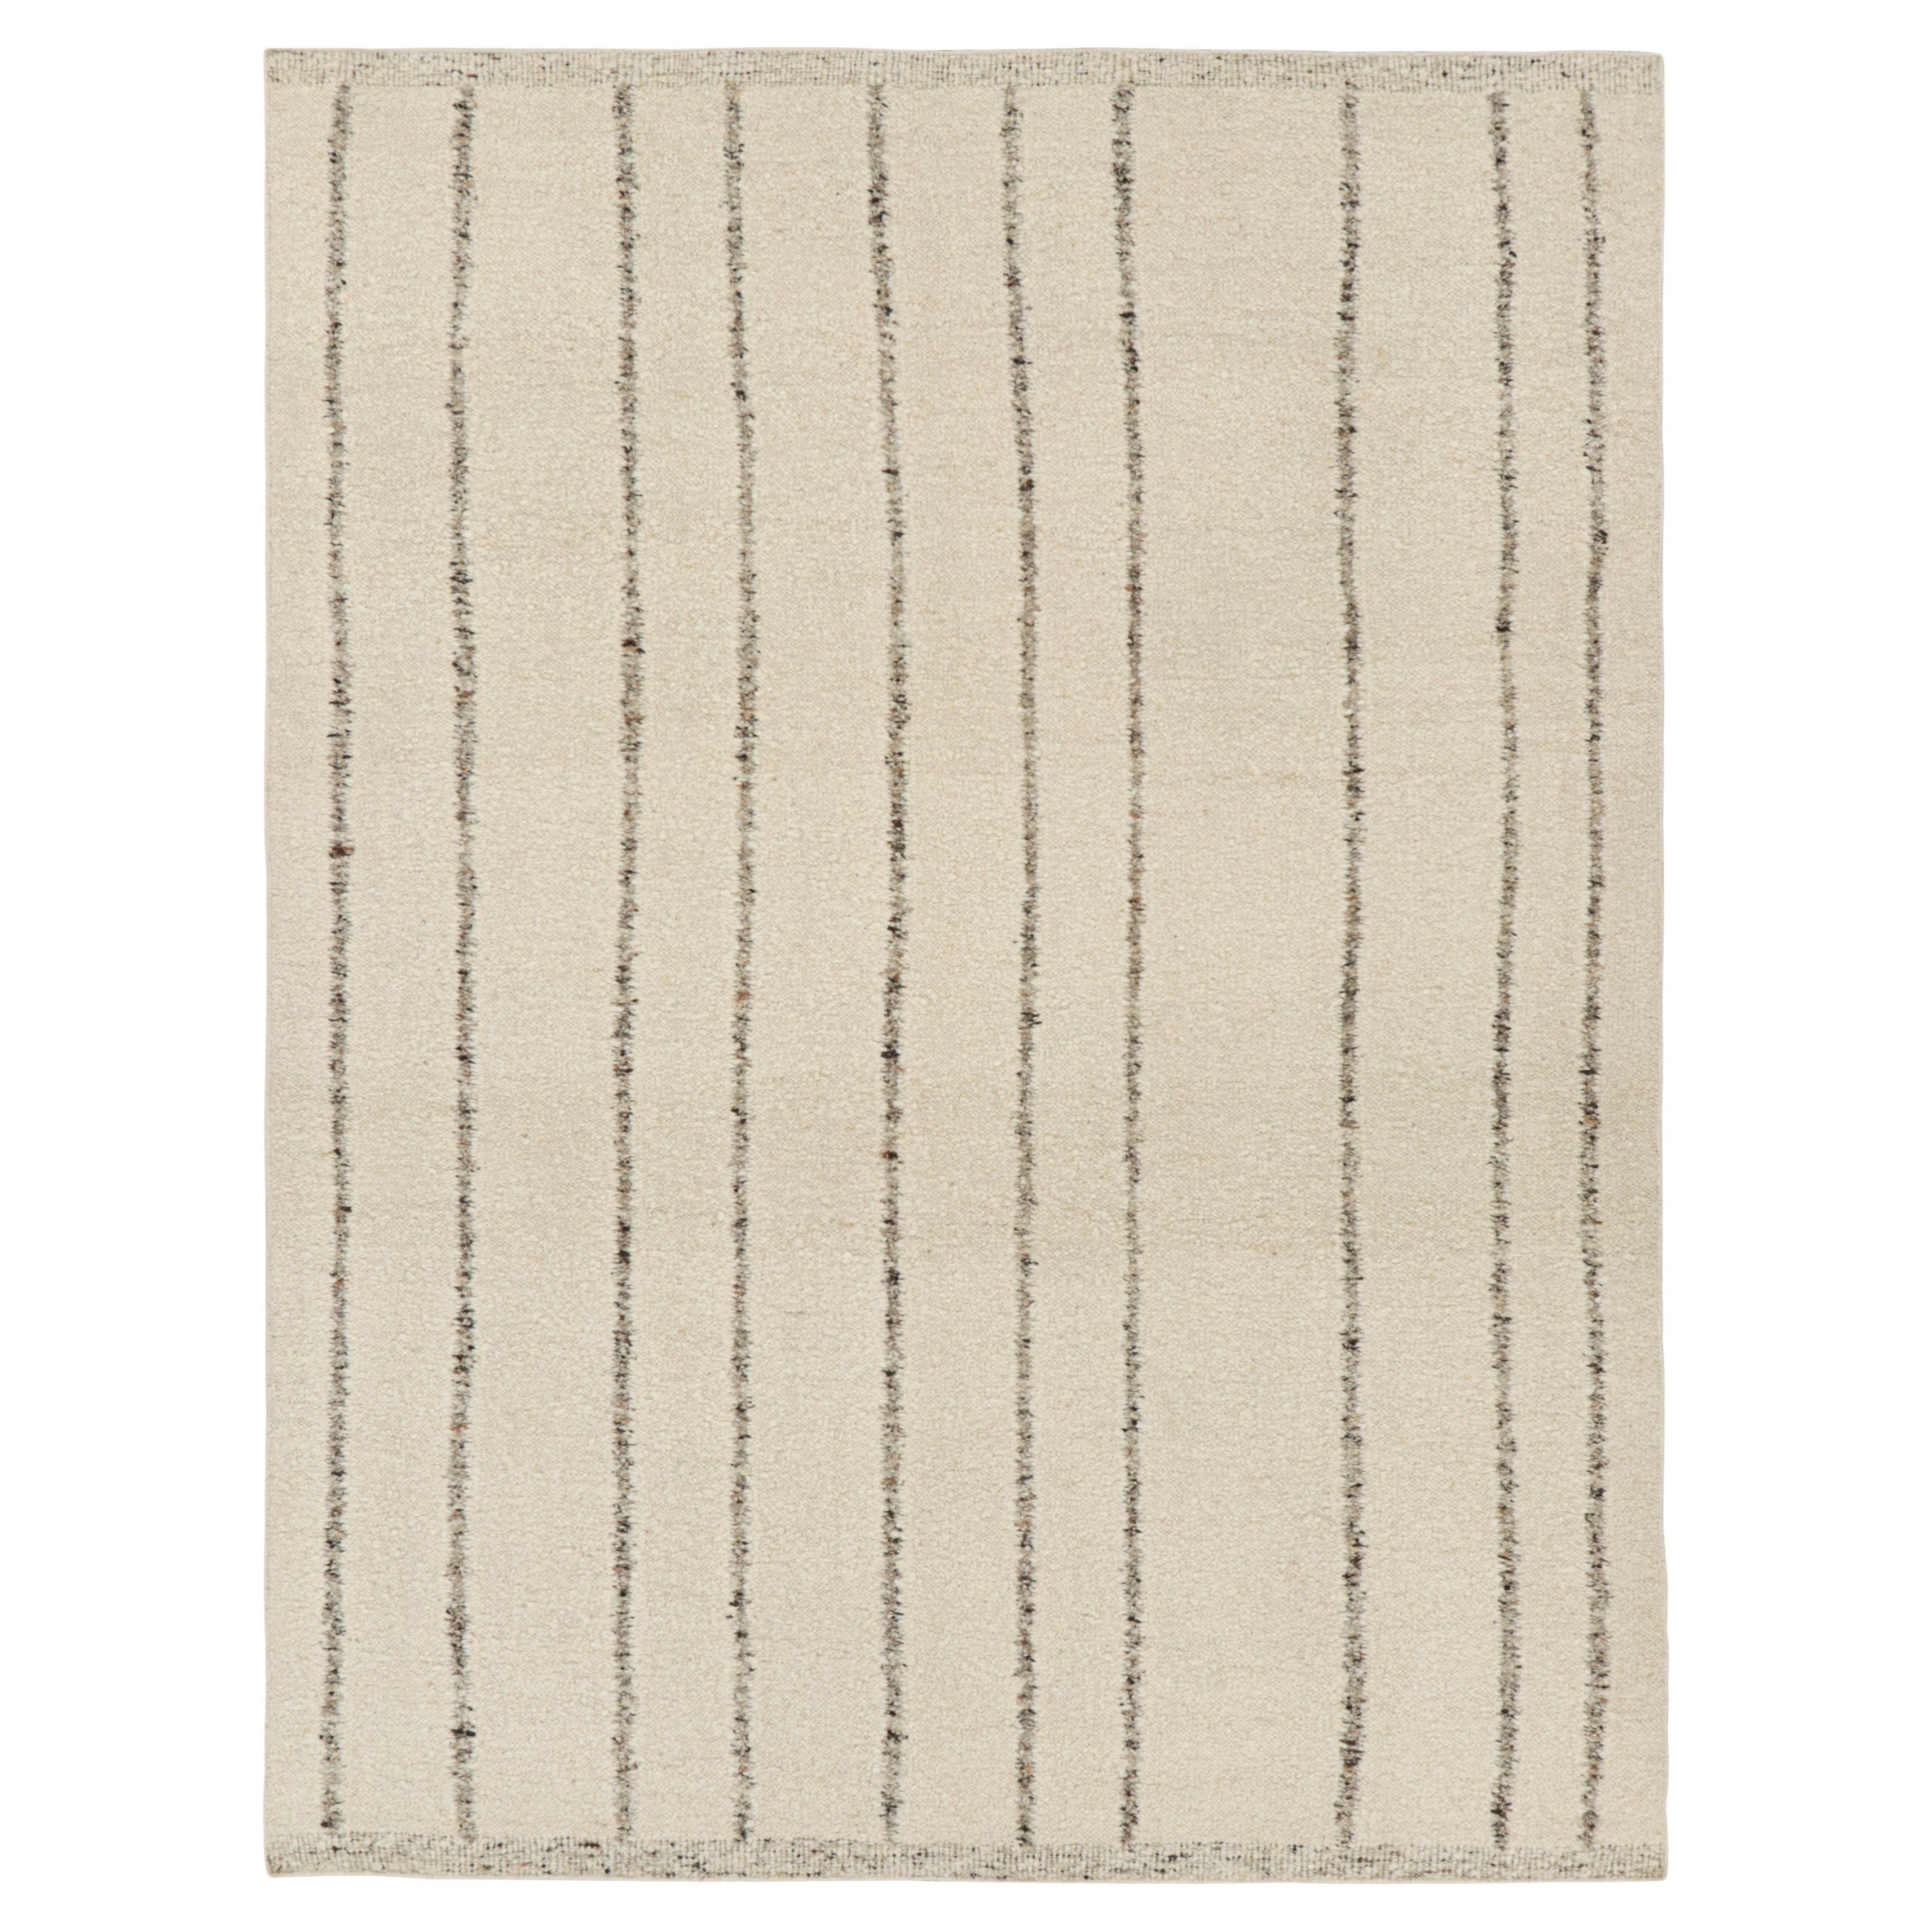 Rug & Kilim’s Contemporary Kilim in Cream and White with Stripes